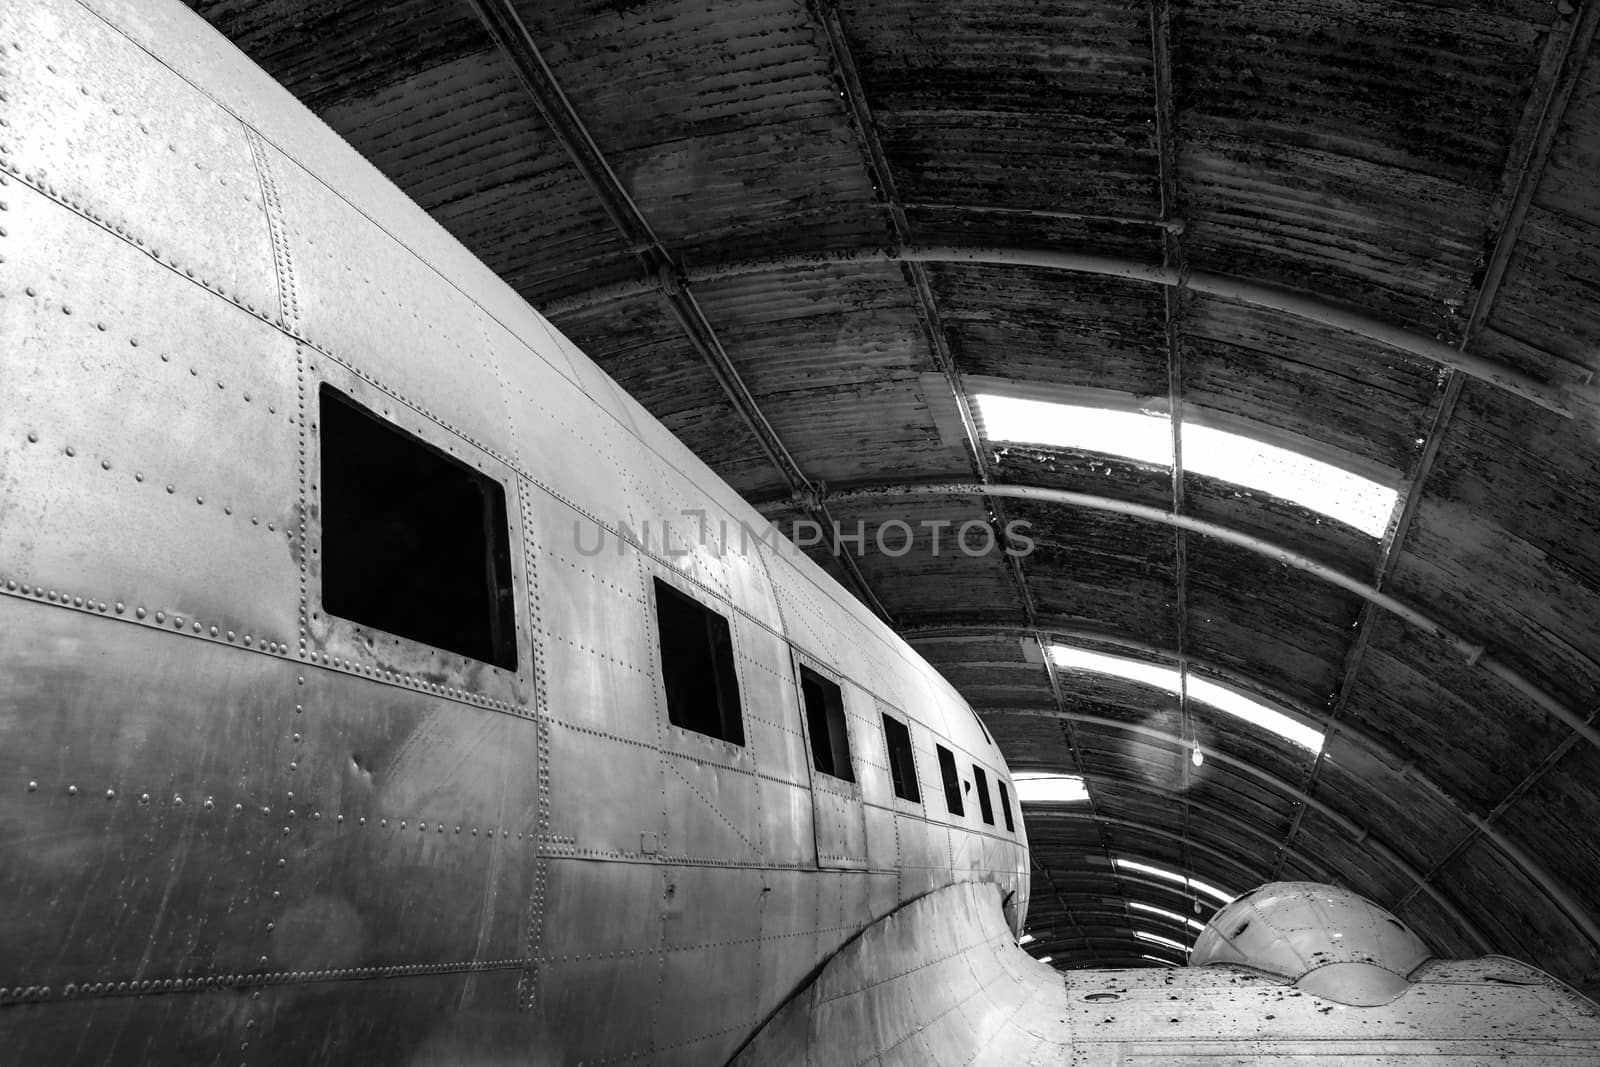 Abstract detail monochrome shot of a disused old aircraft in a hangar